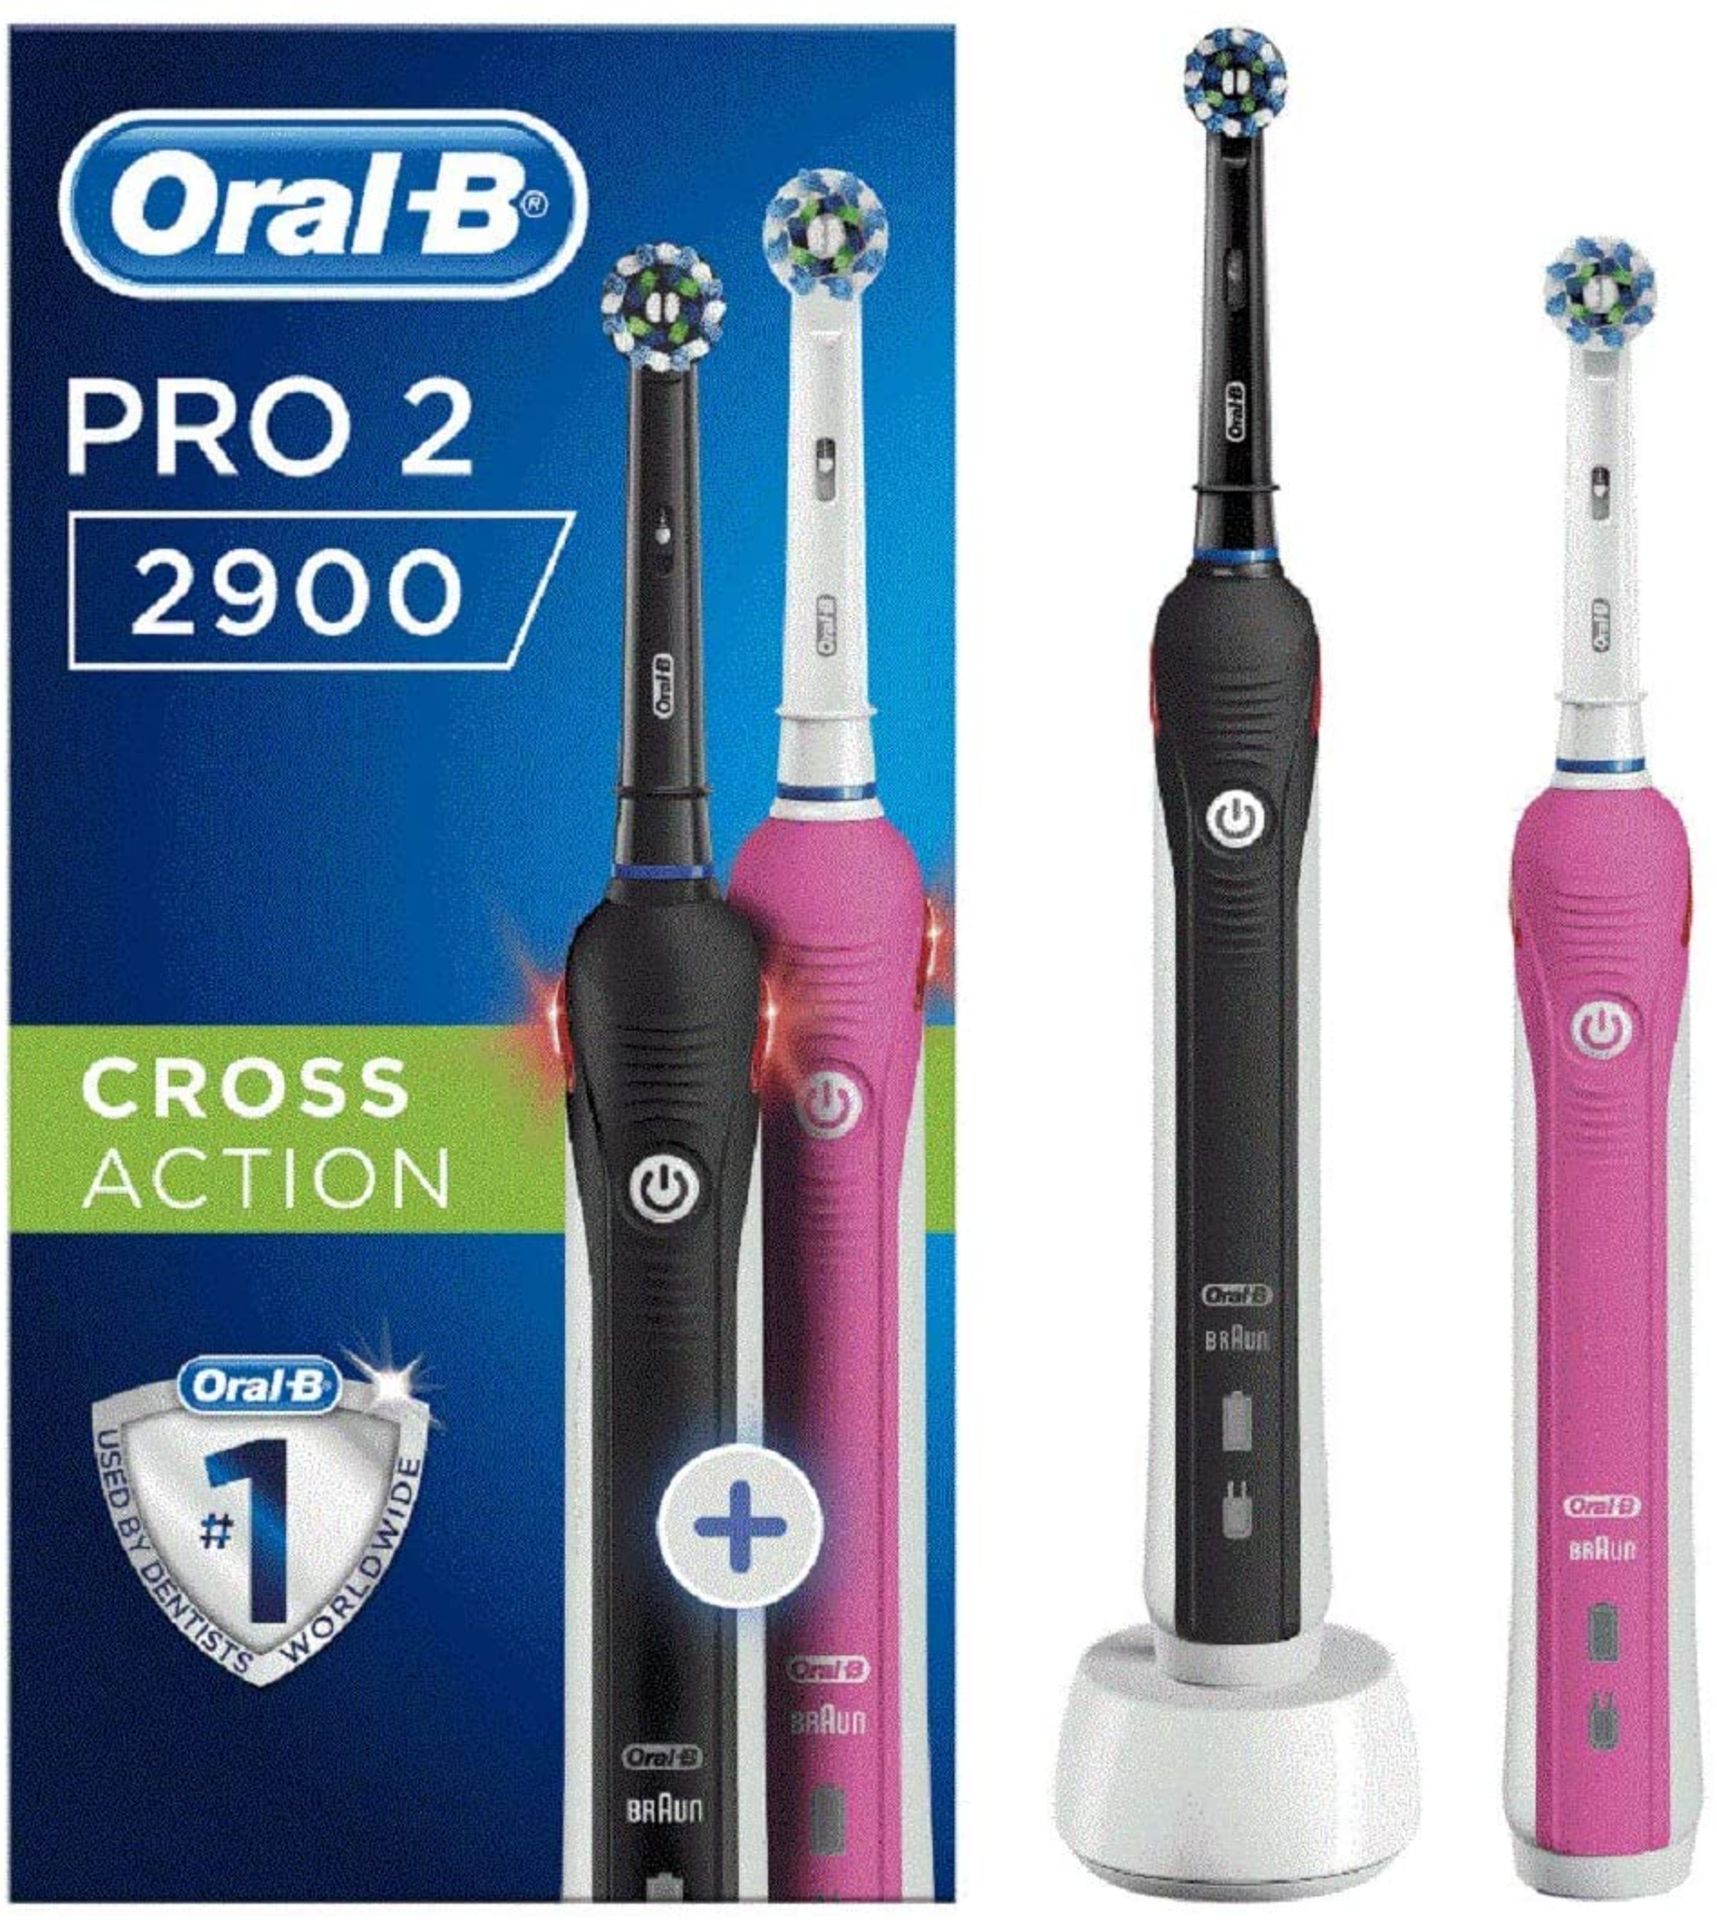 RRP £60 Oral-B Pro 2 2900 Set of 2 CrossAction Electric Rechargeable Toothbrushes, 1 Black and 1 Pin